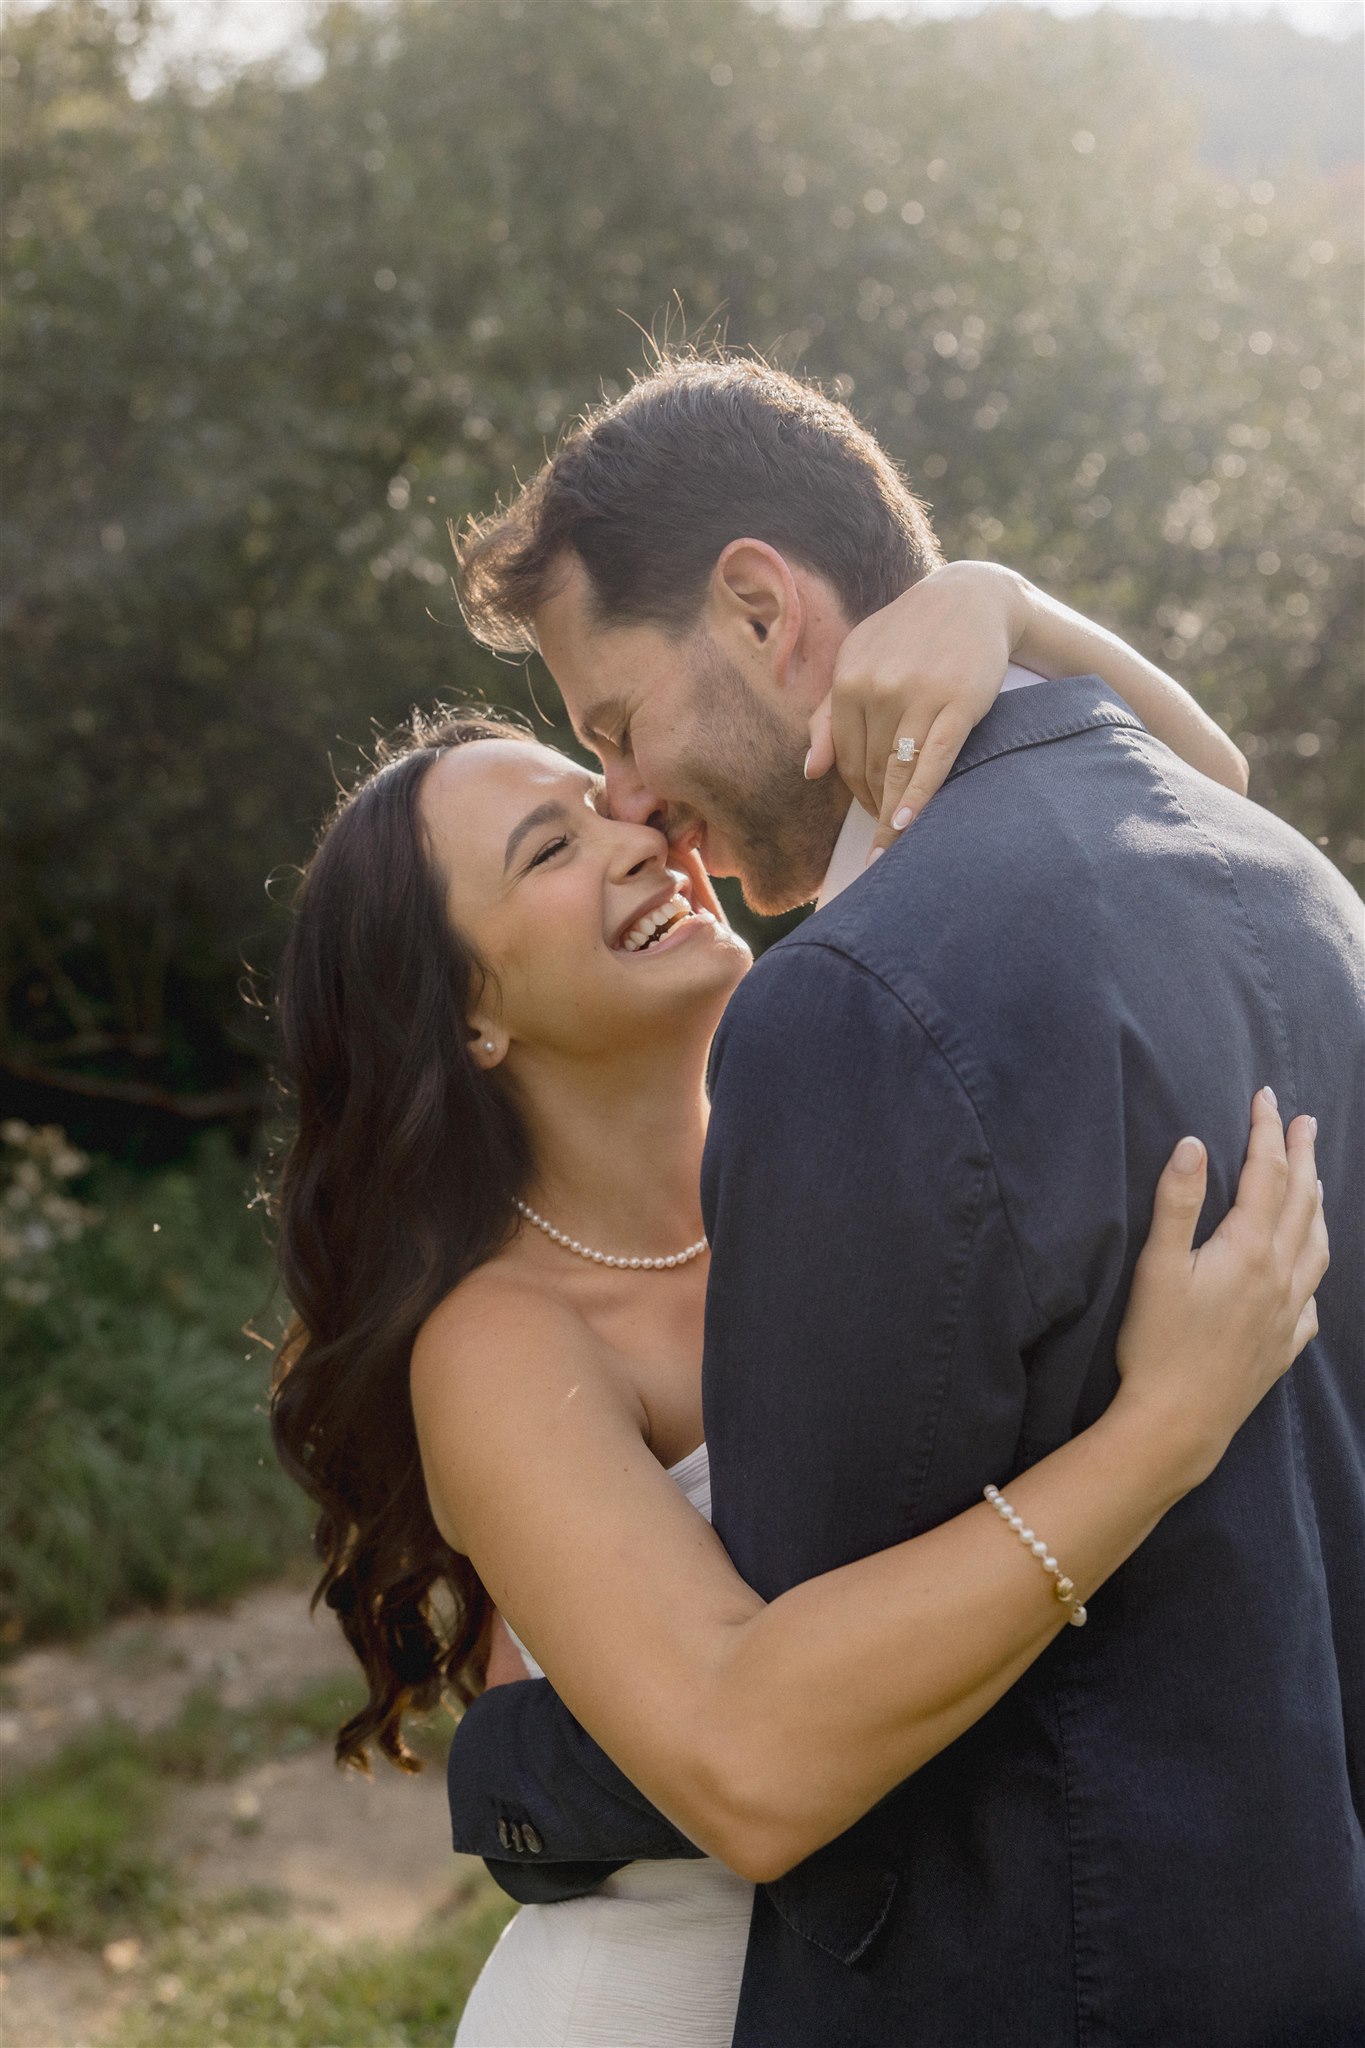 Stunning groom poses with his beautiful bride during their wedding rehearsal dinner photoshoot